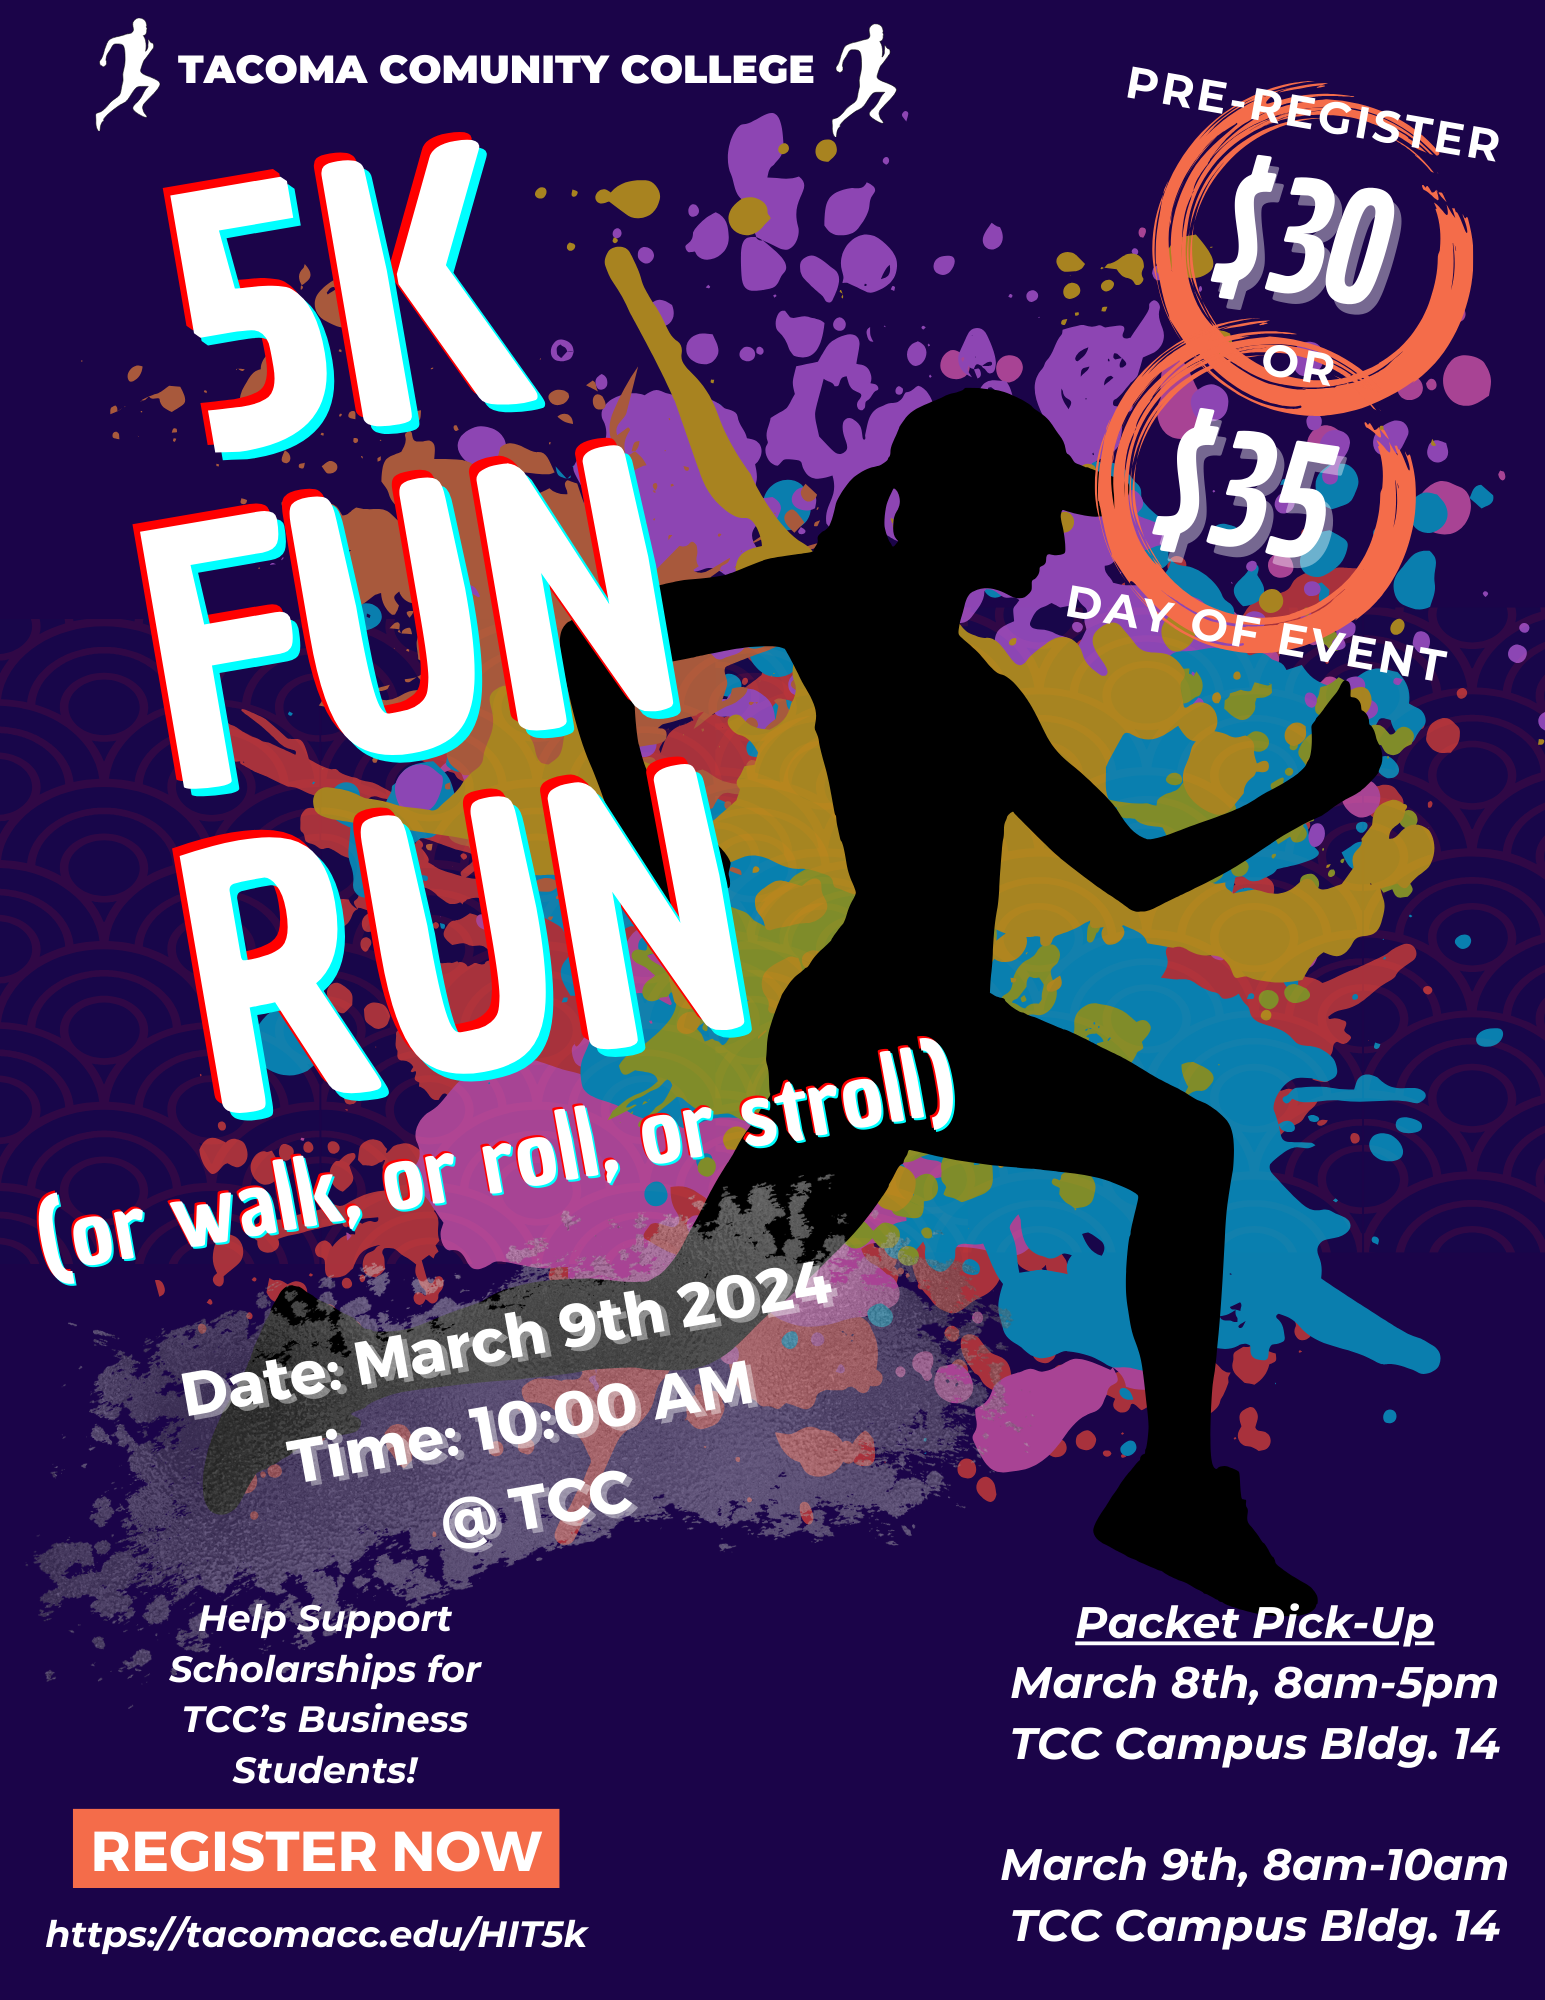 Colorful flyer with the image of a runner. TCC 5K Fun Run or walk, or roll, or stroll. Date: March 9, 2024. Time: 10 a.m. Help support scholarships for TCC's Business students! Register now: tacomacc.edu/HIT5K. Pre Register: $30 or $35 day of event. Packet pick-up: March 8, 8 a.m. - 5 p.m. TCC Campus Building 14 & March 9, 8 - 10 a.m. TCC Campus Building 14. 